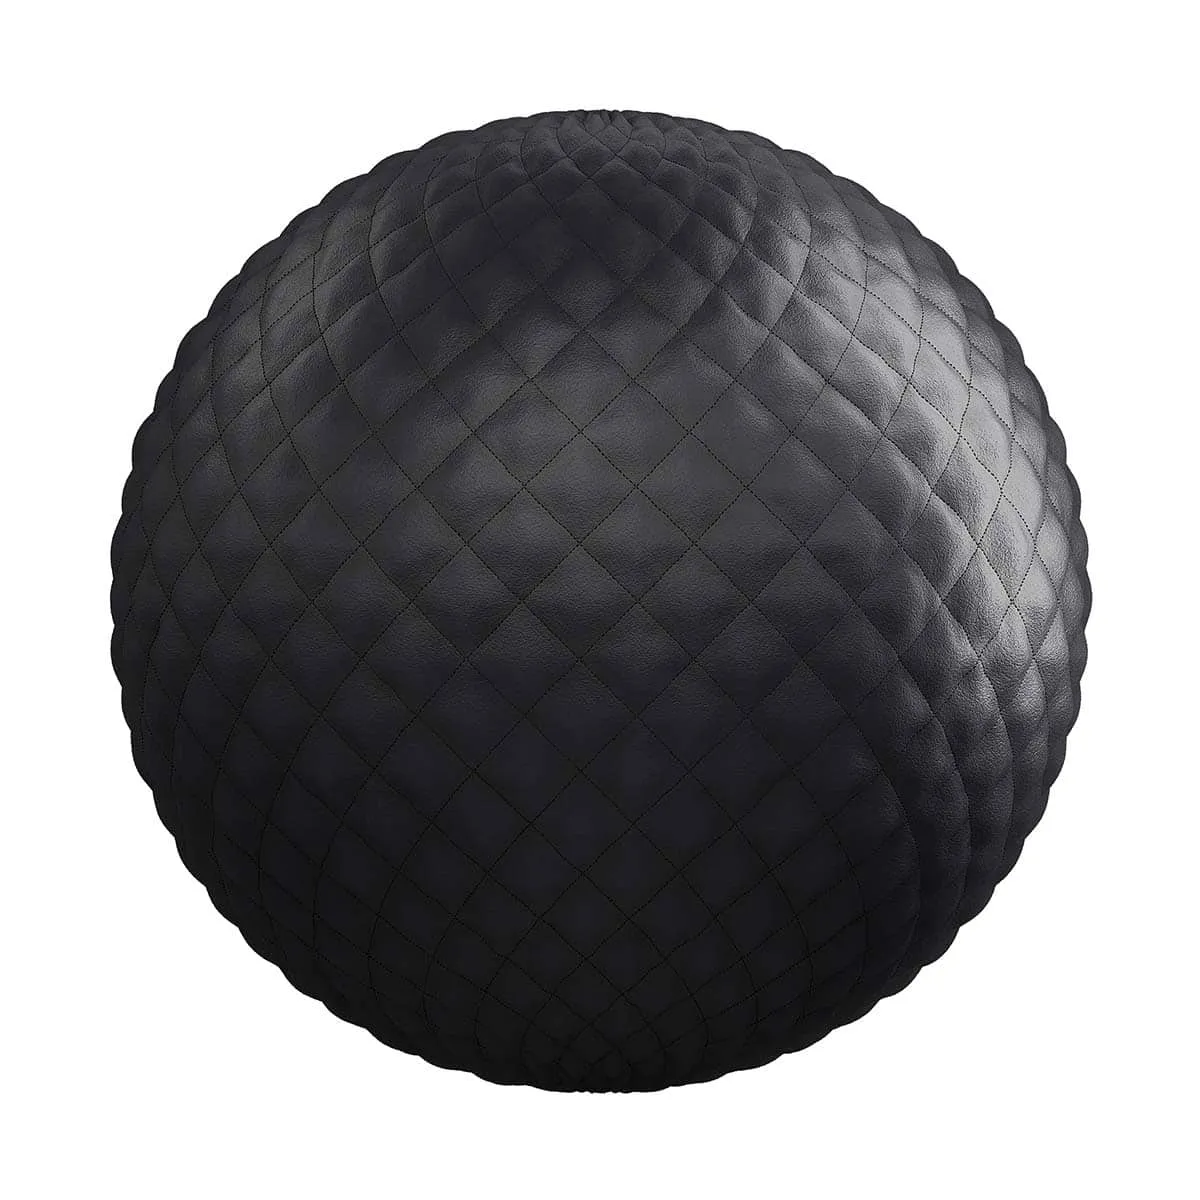 PBR Textures Volume 27 – Fabrics – 4K – 8K – quilted_black_leather_26_85